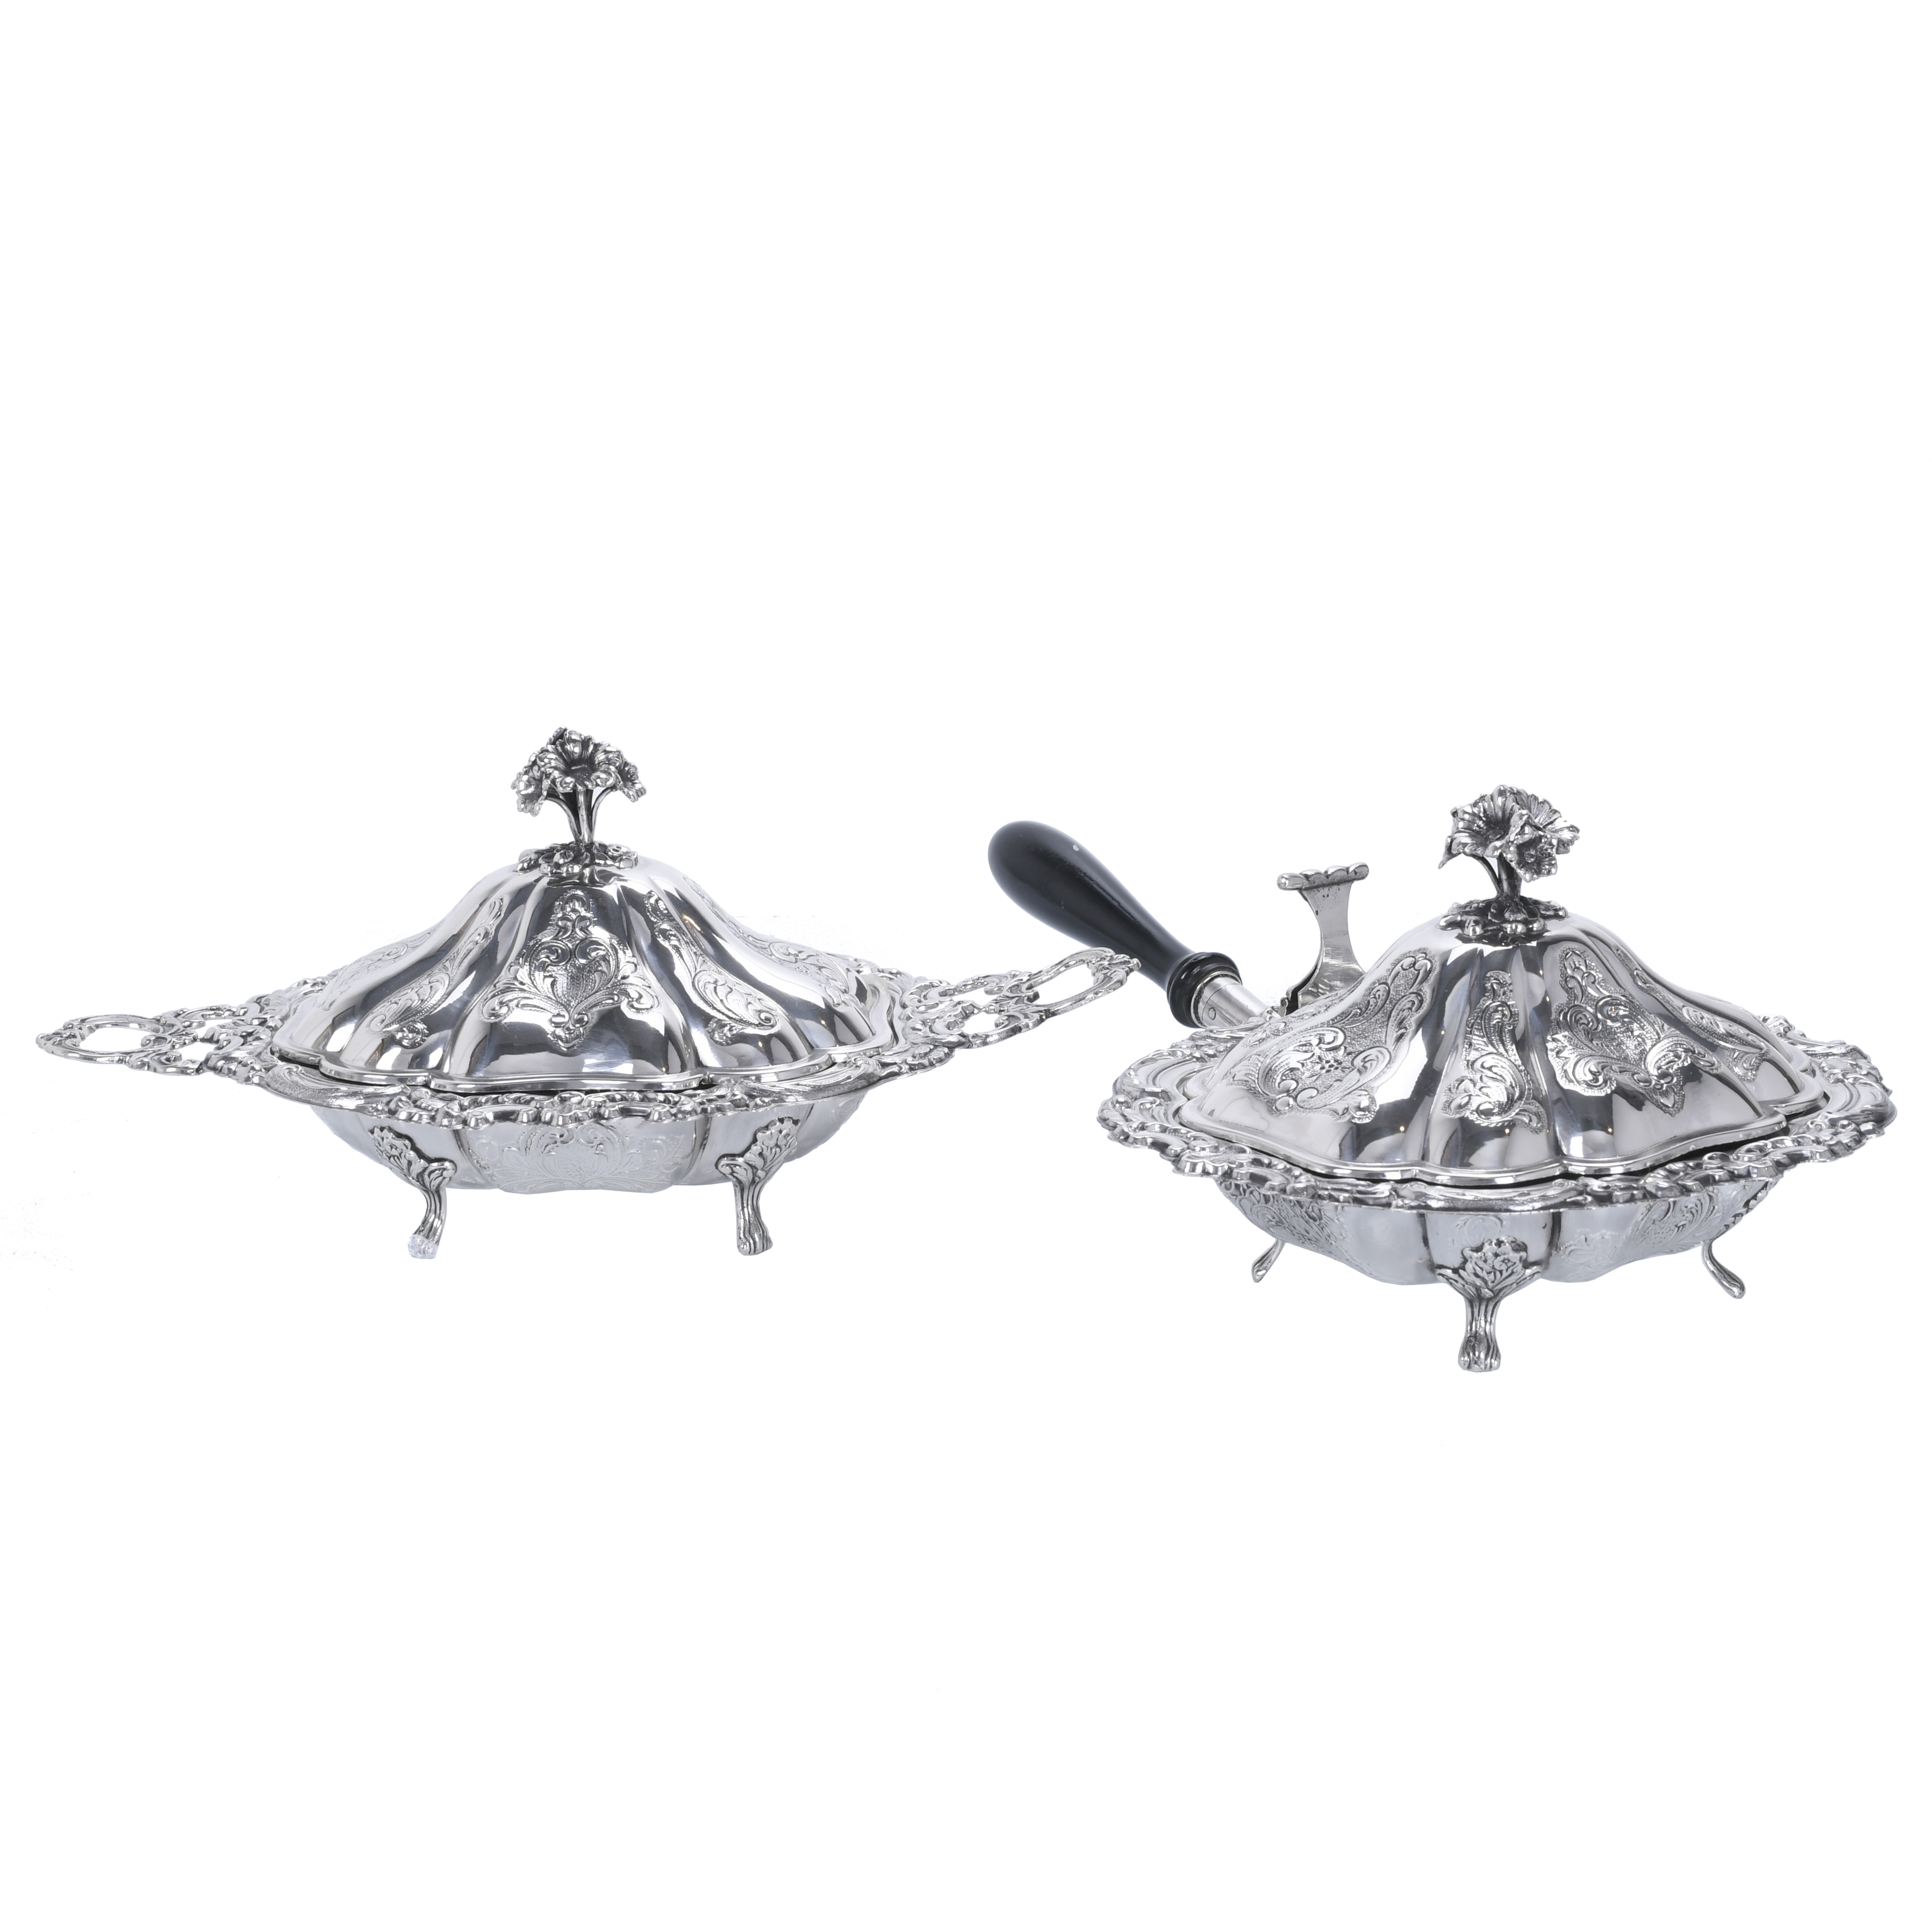 SPANISH TRAY AND SAUCEPAN OR TRAY FOR LEGUMES IN SILVER, MI